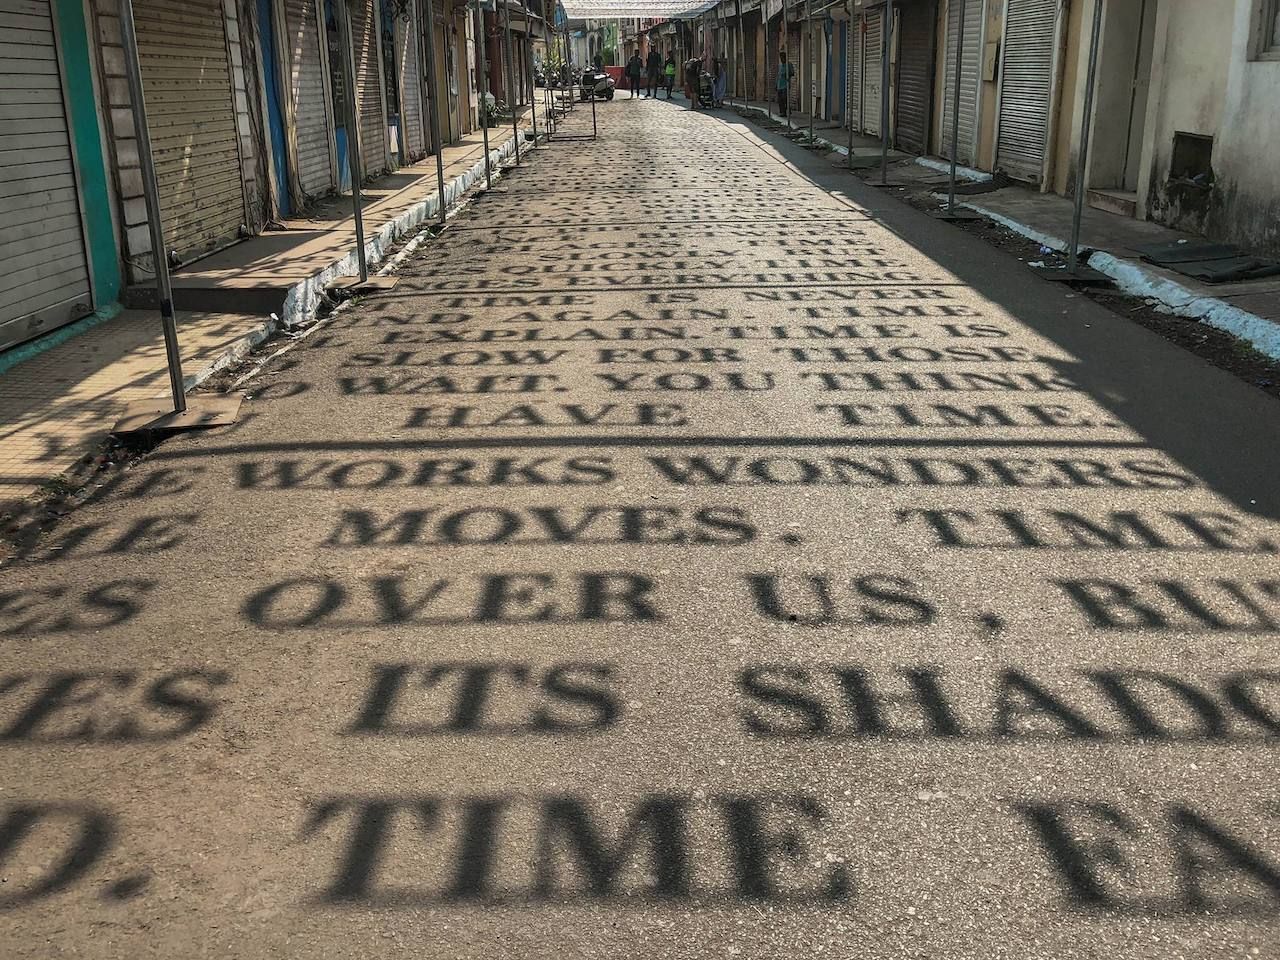 Letters art installation in India